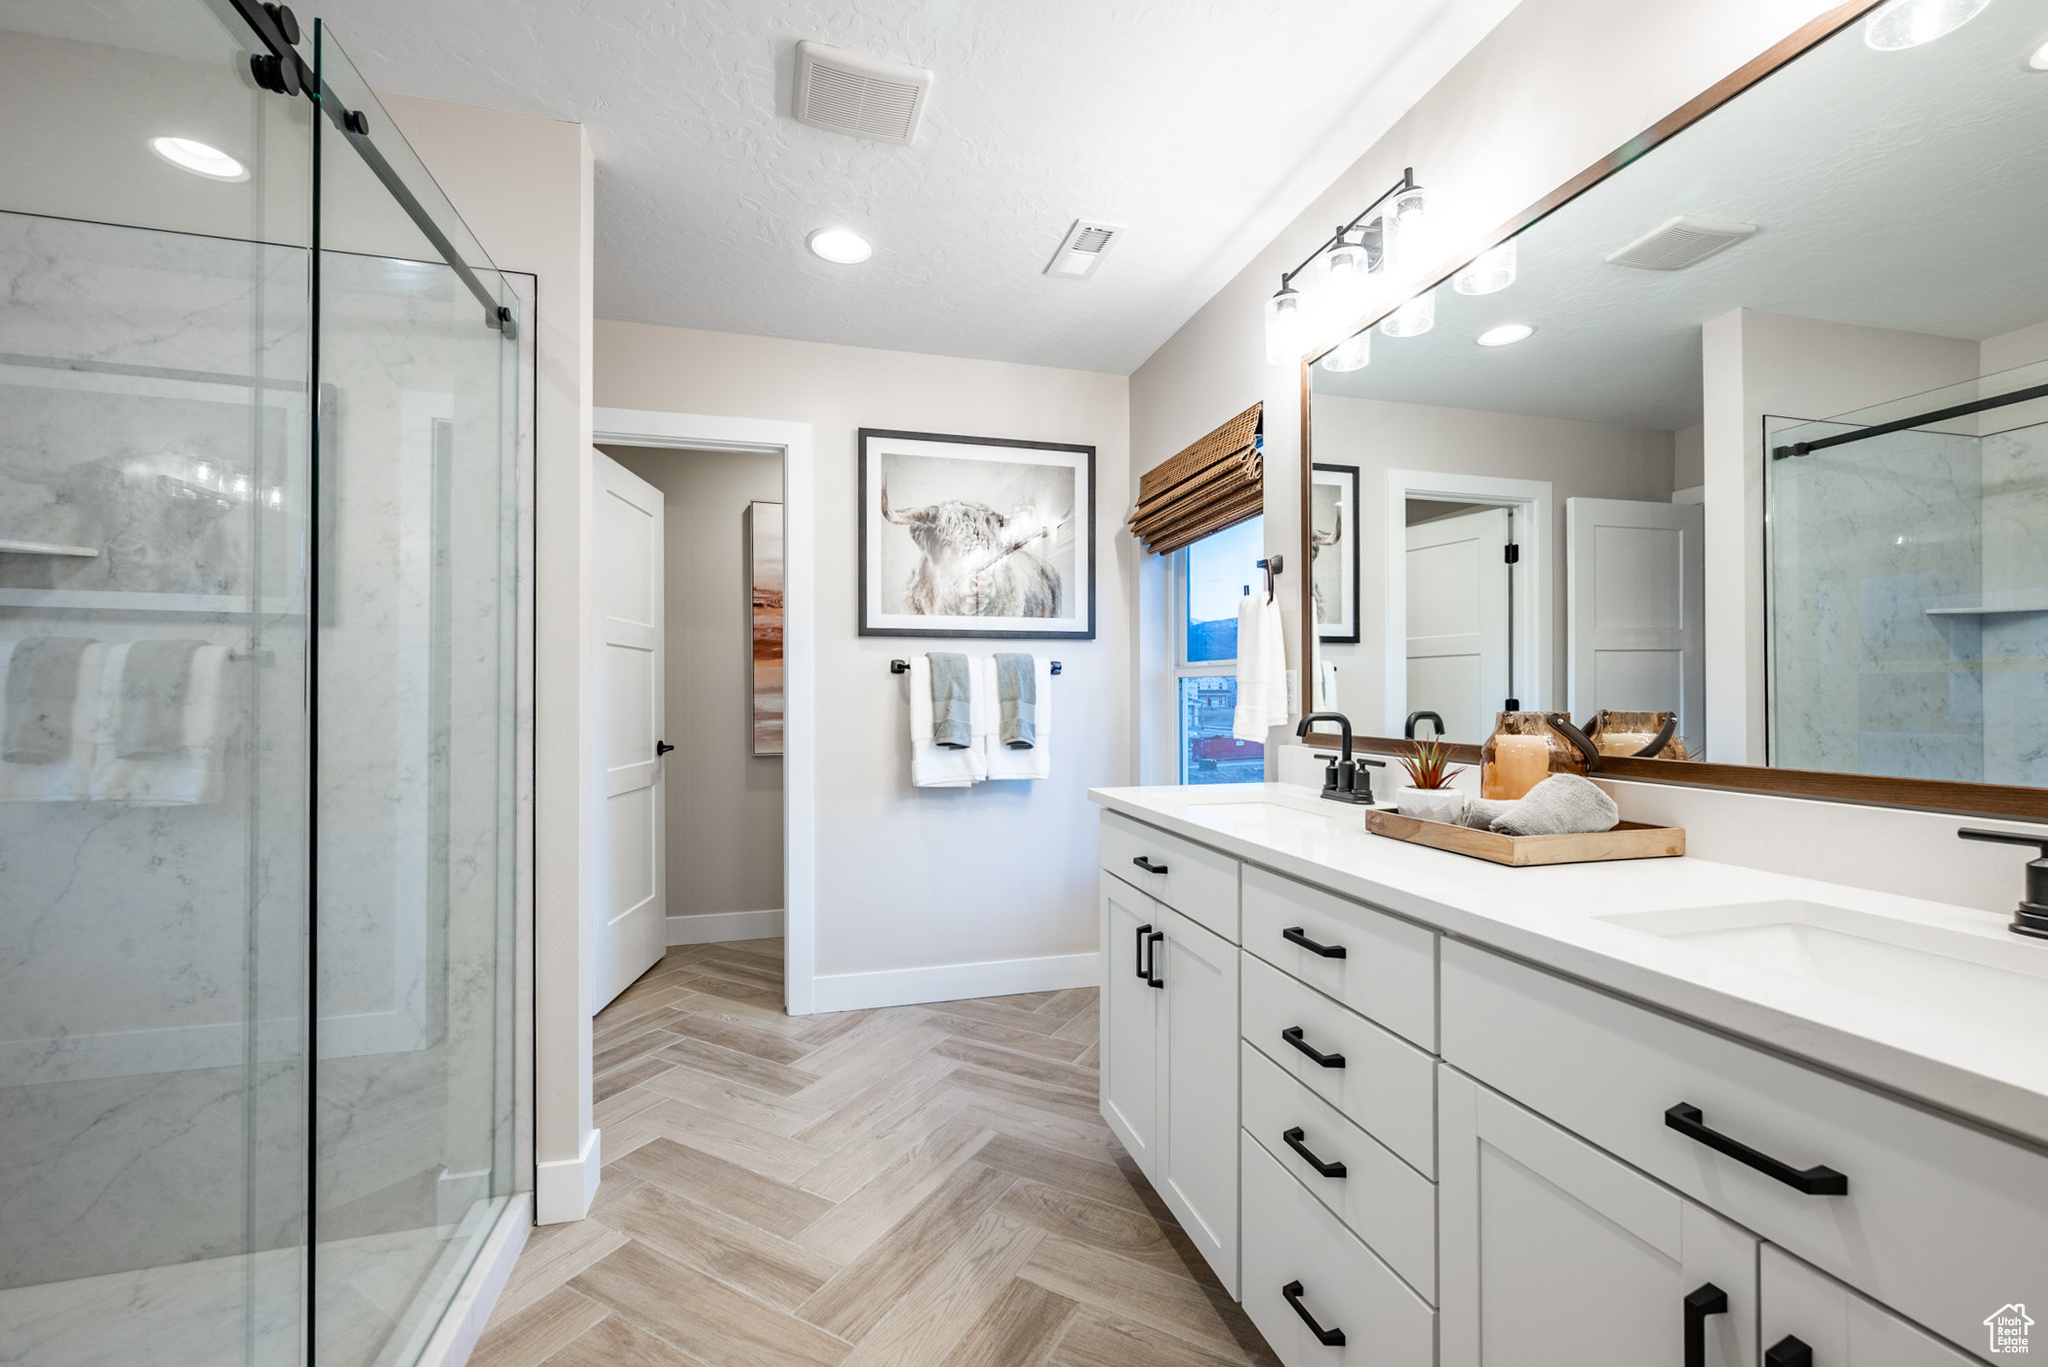 Bathroom featuring dual sinks, large vanity, an enclosed shower, and parquet flooring